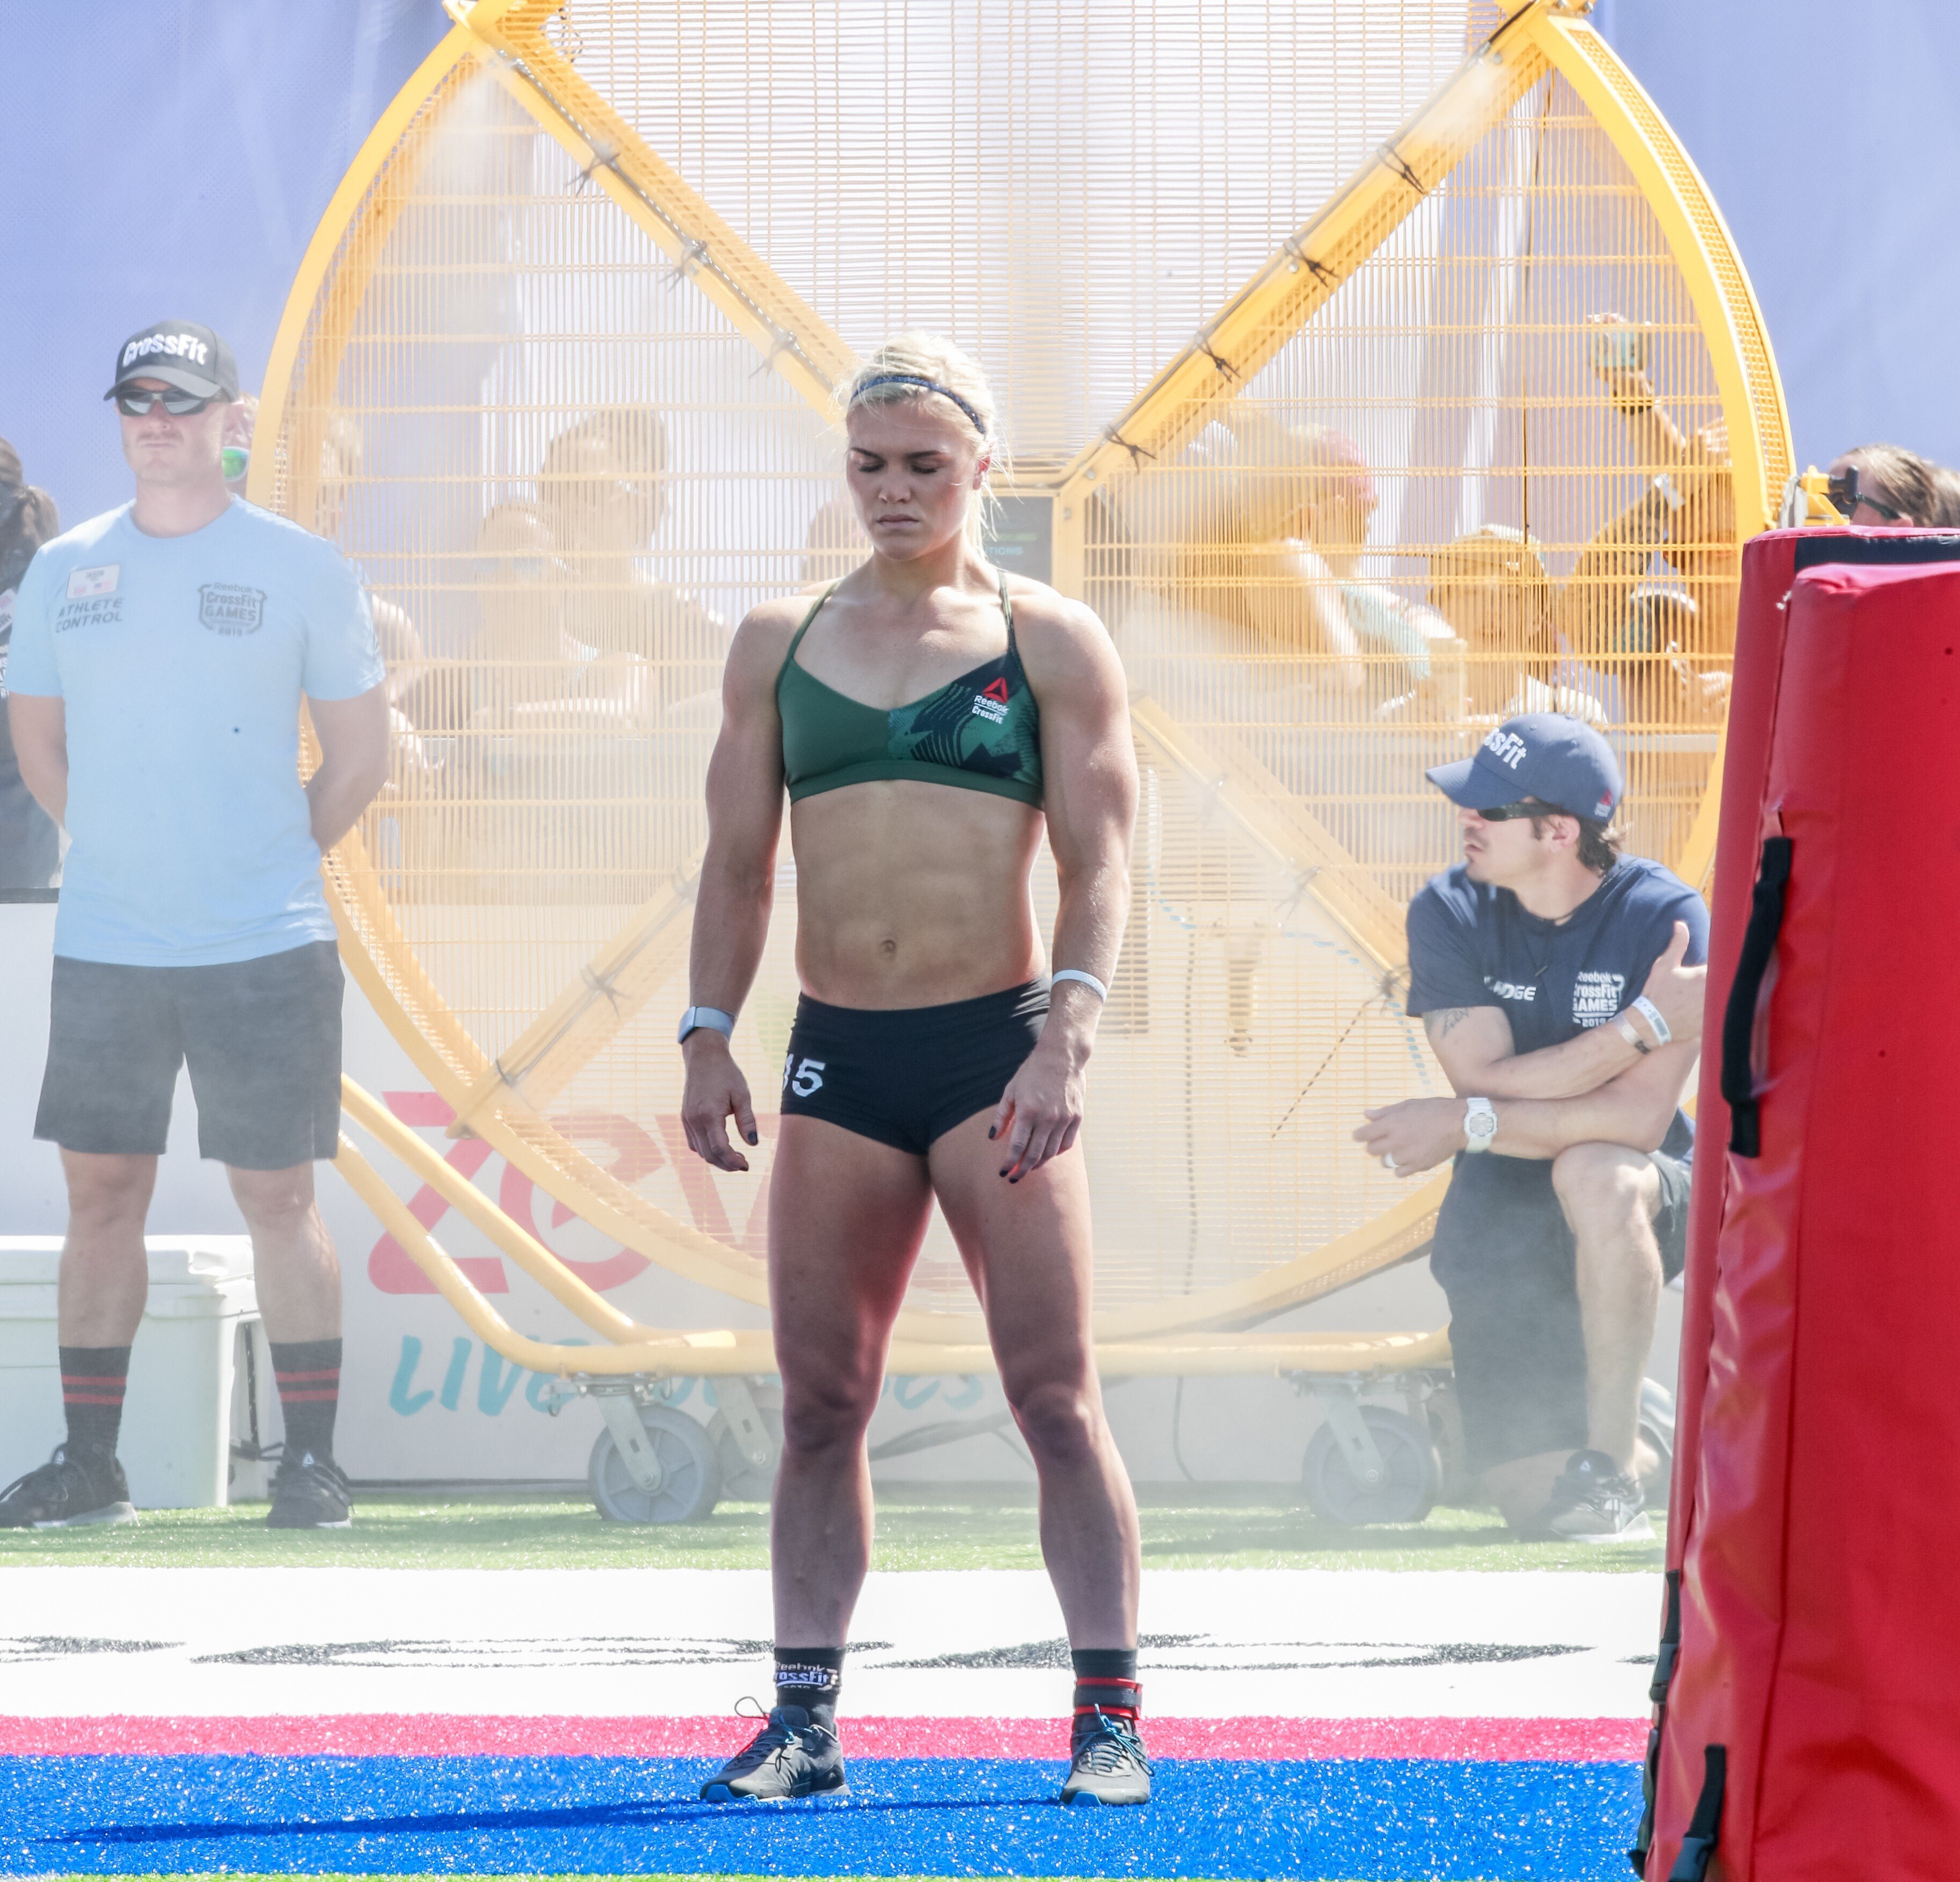 Who are you a fan of this weekend at Rogue? Photo: CrossFit Games